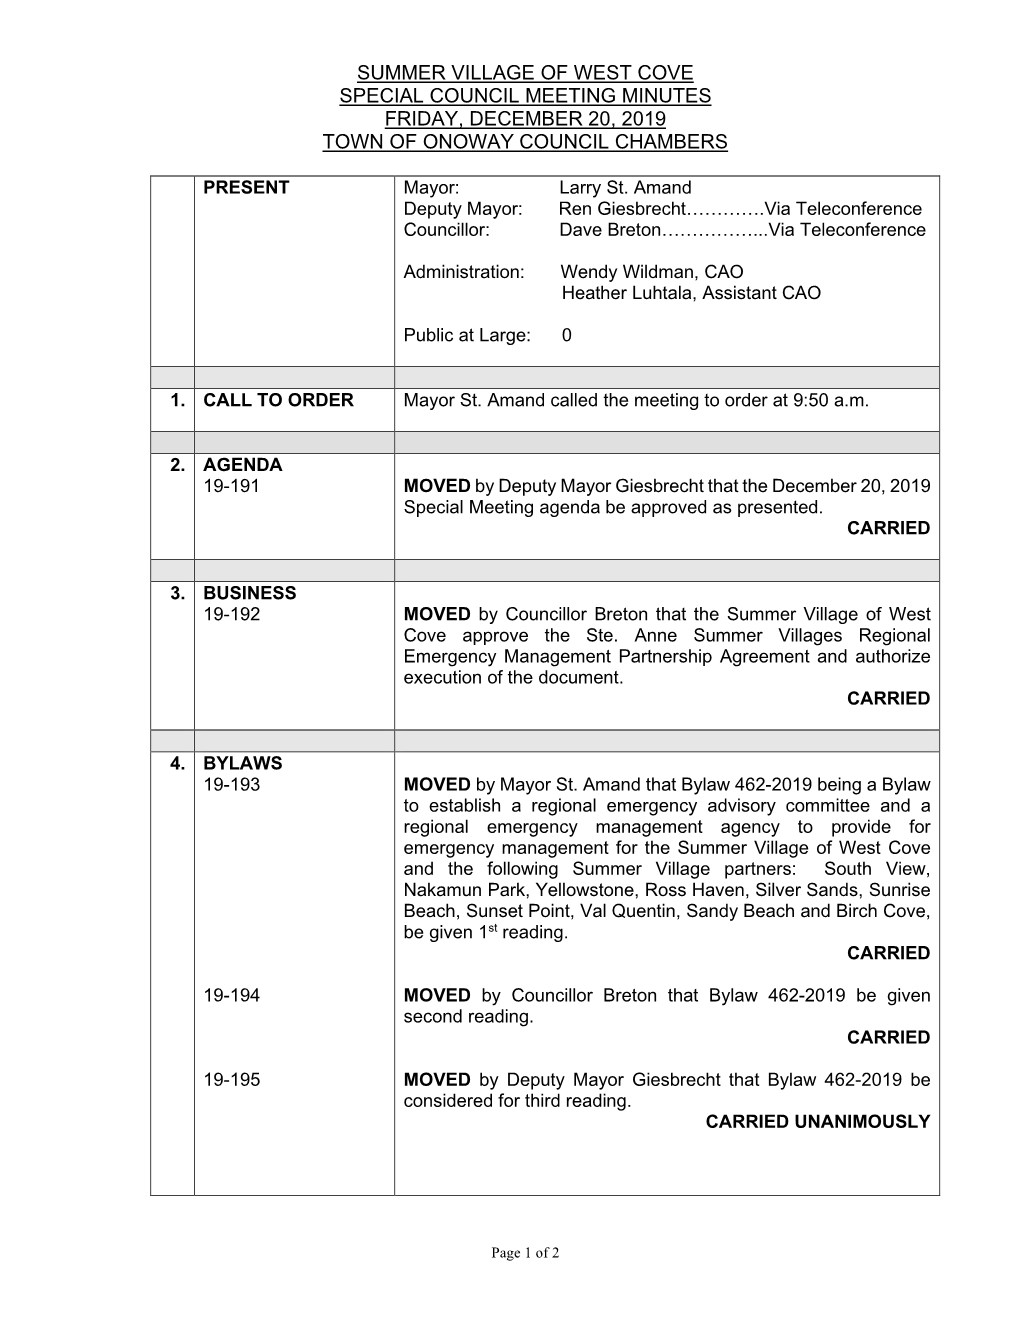 December 20, 2019 Special Meeting Agenda Be Approved As Presented